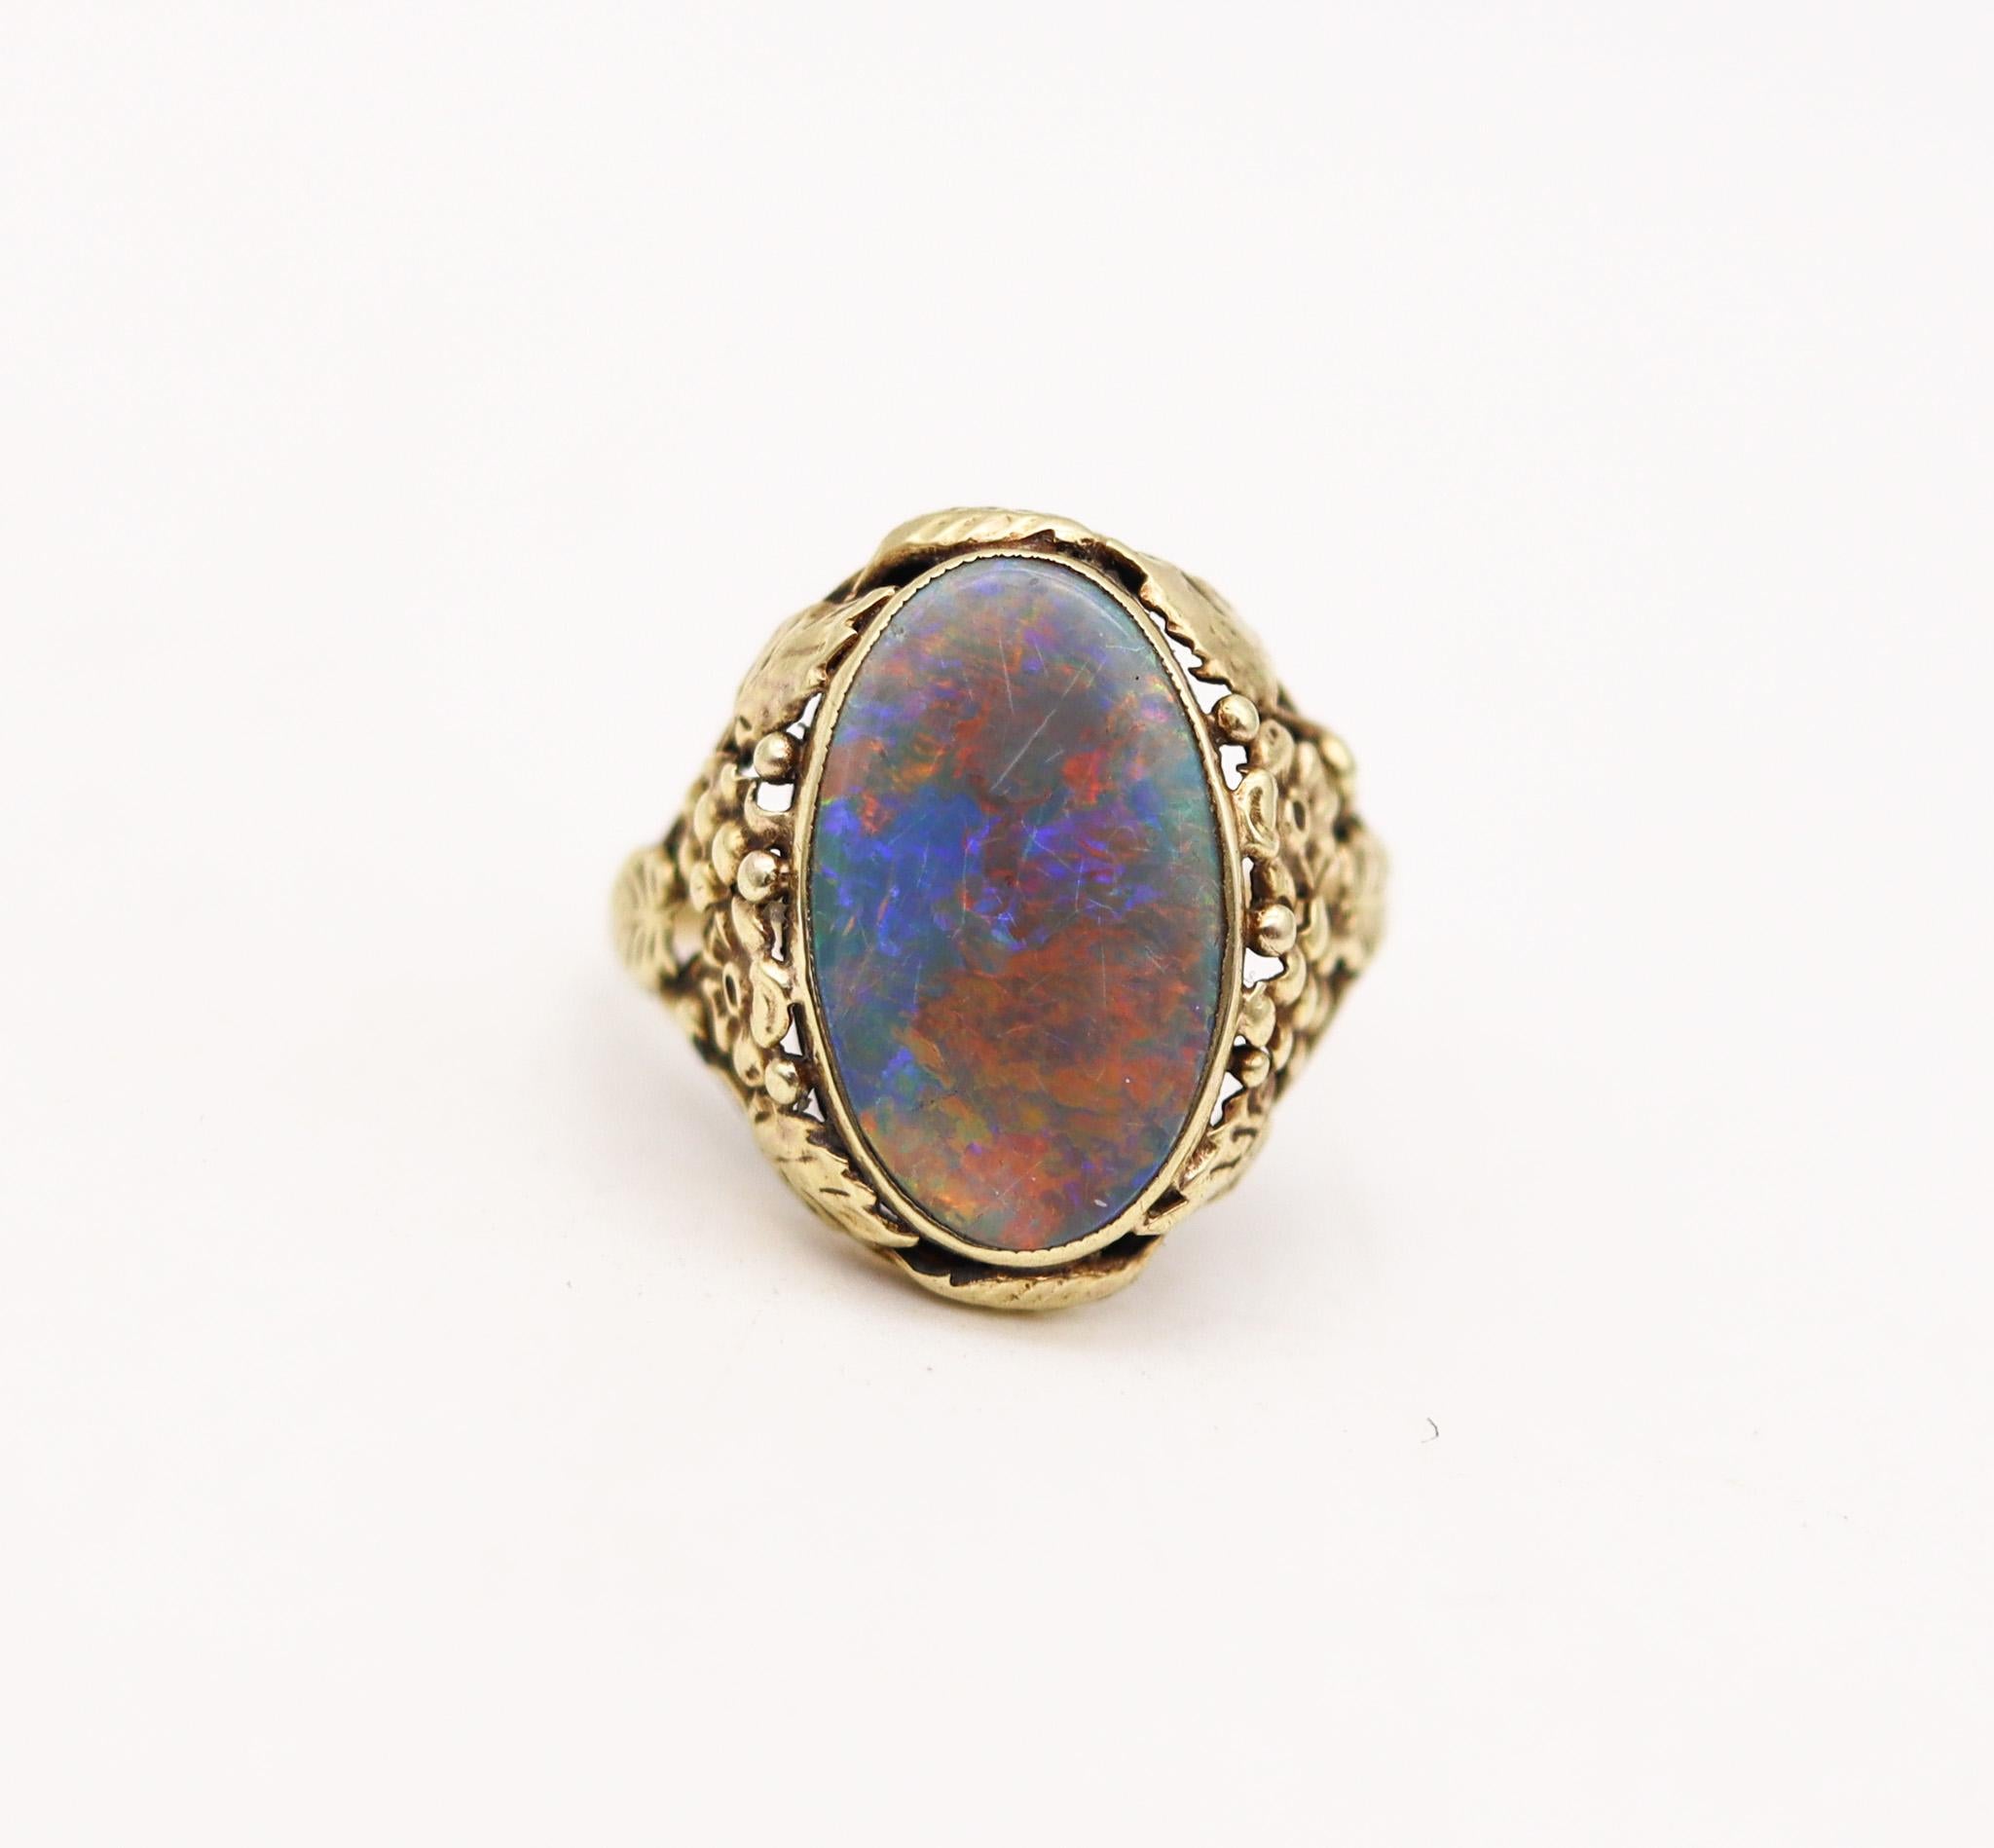 An art nouveau ring with Black opal.

A highly decorated ring, created in America during the art nouveau period, back in the 1895. This beautiful ring has been crafted with intricate organic motifs of leaves and grapes in yellow gold of 14 karats